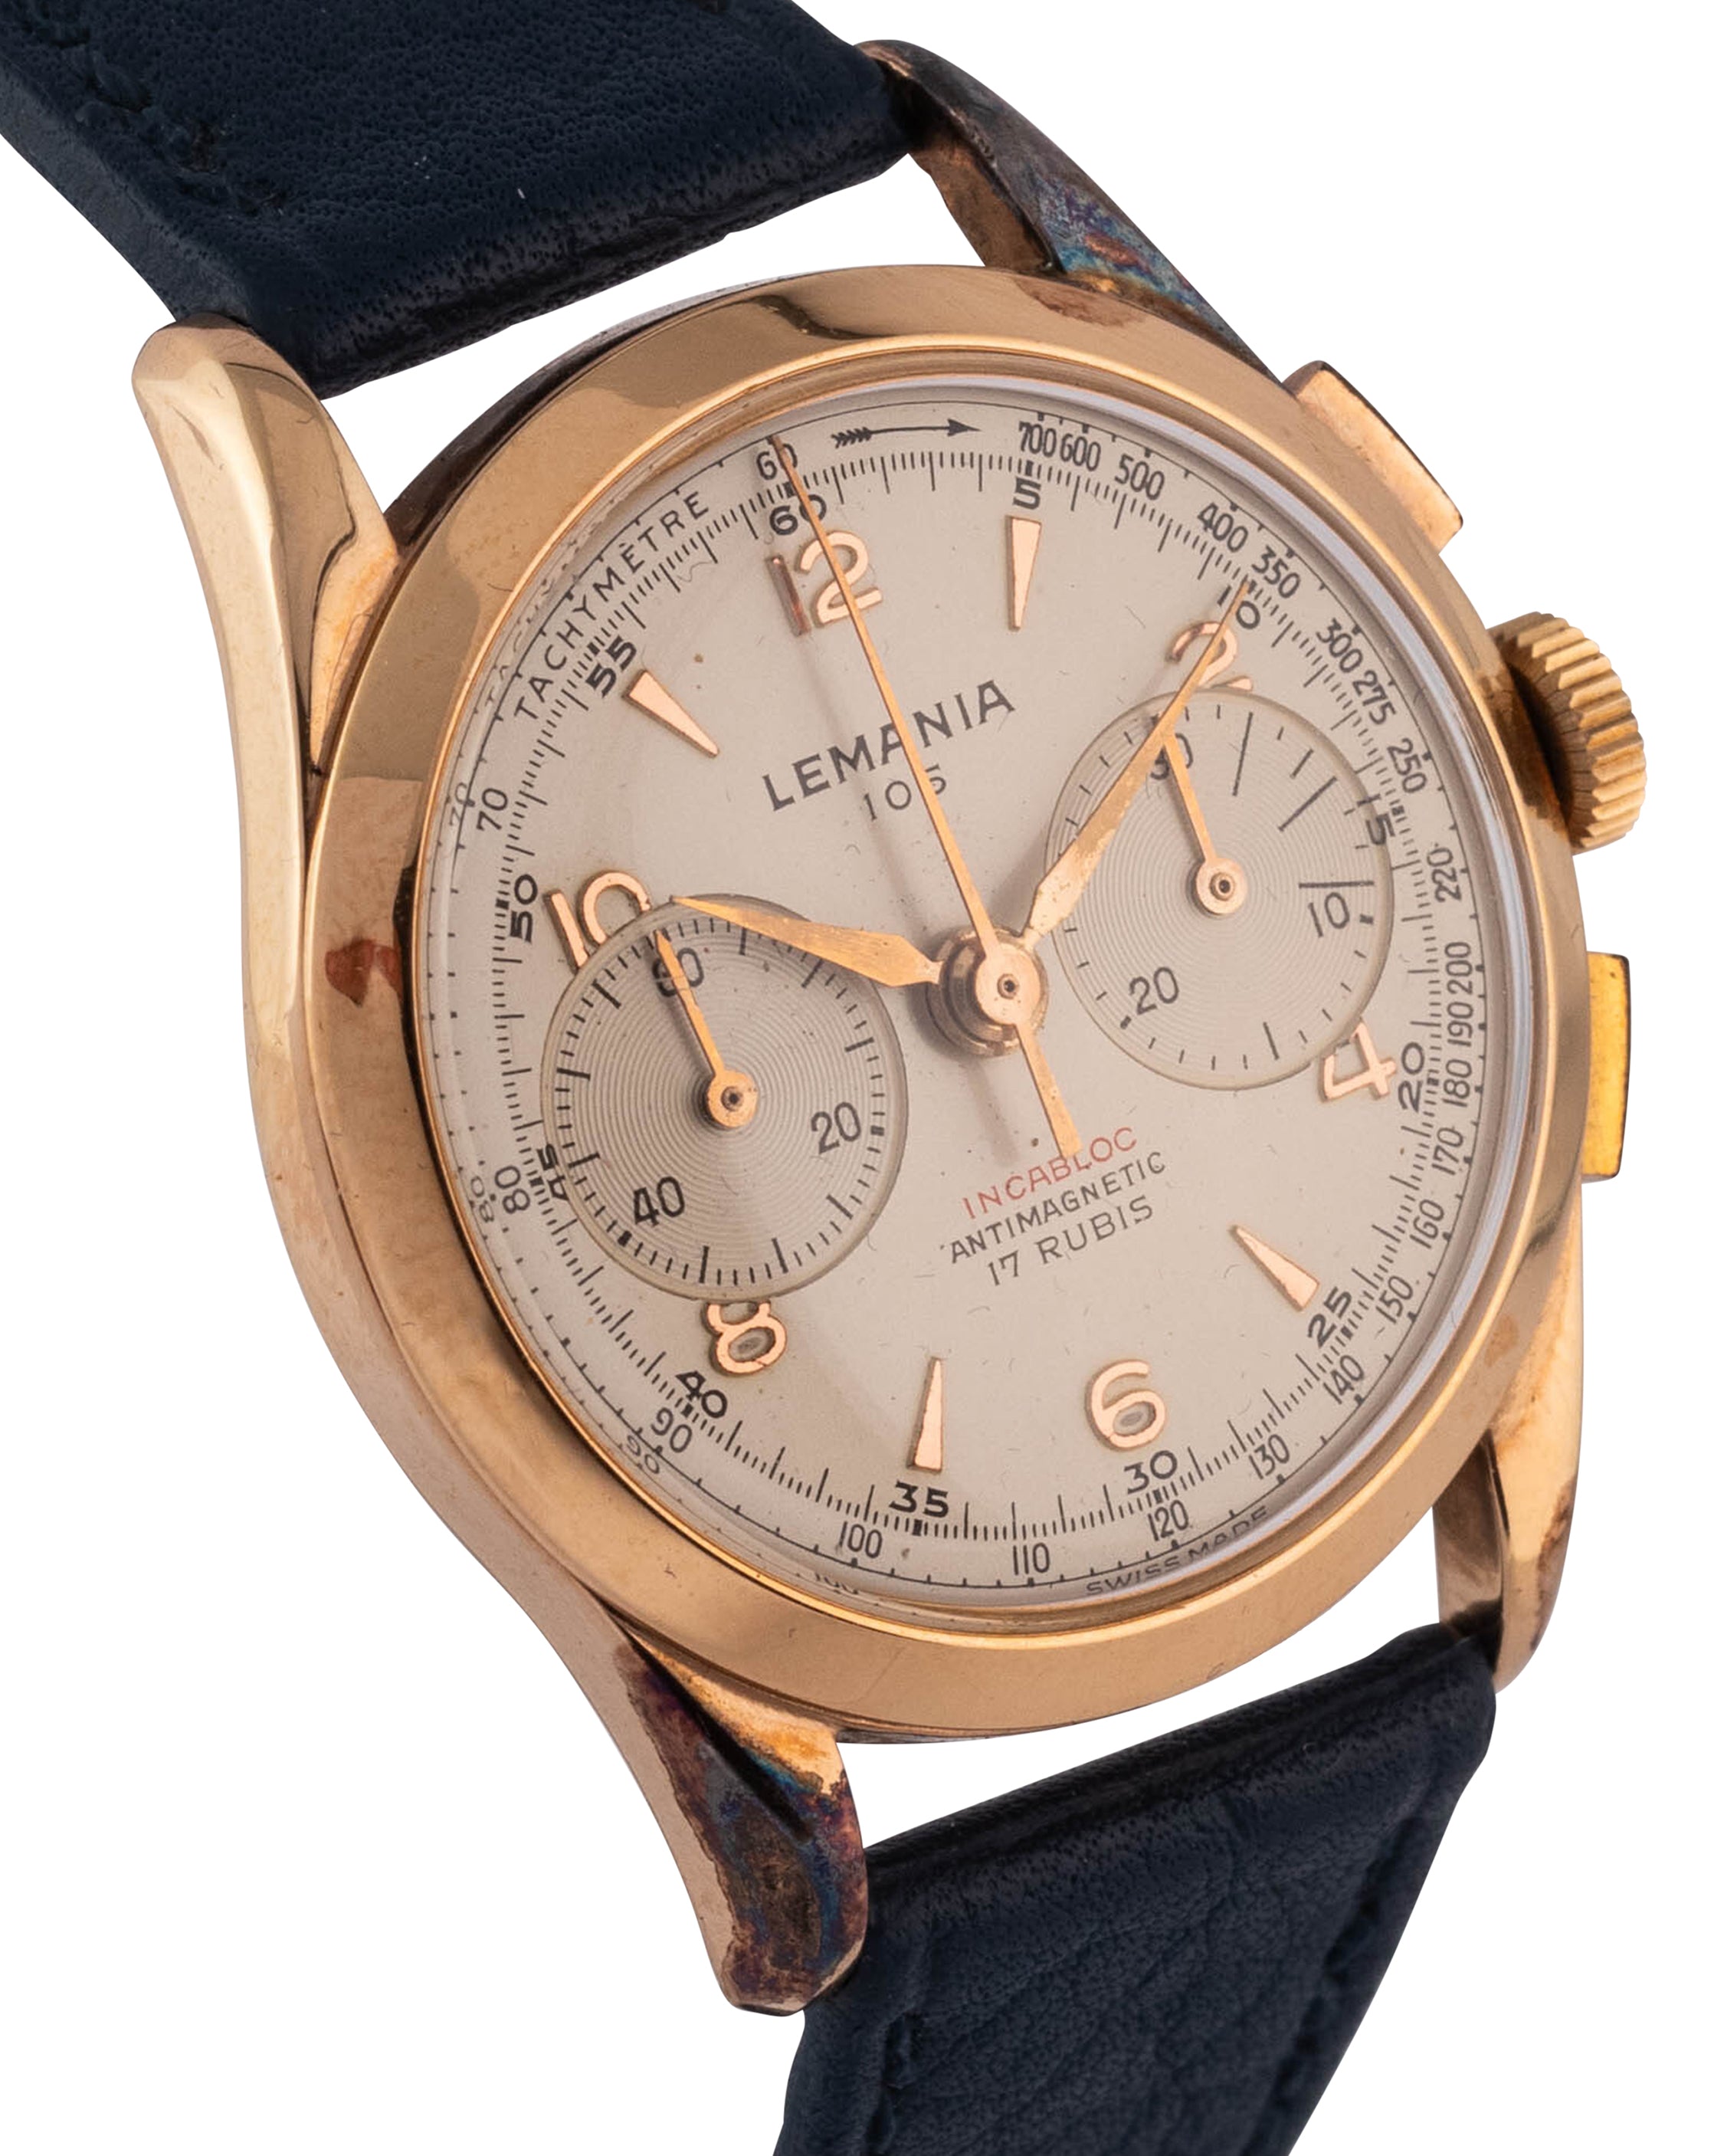 Lemania Chronograph "105 Incabloc" wrist watch, yellow gold case with white dial 